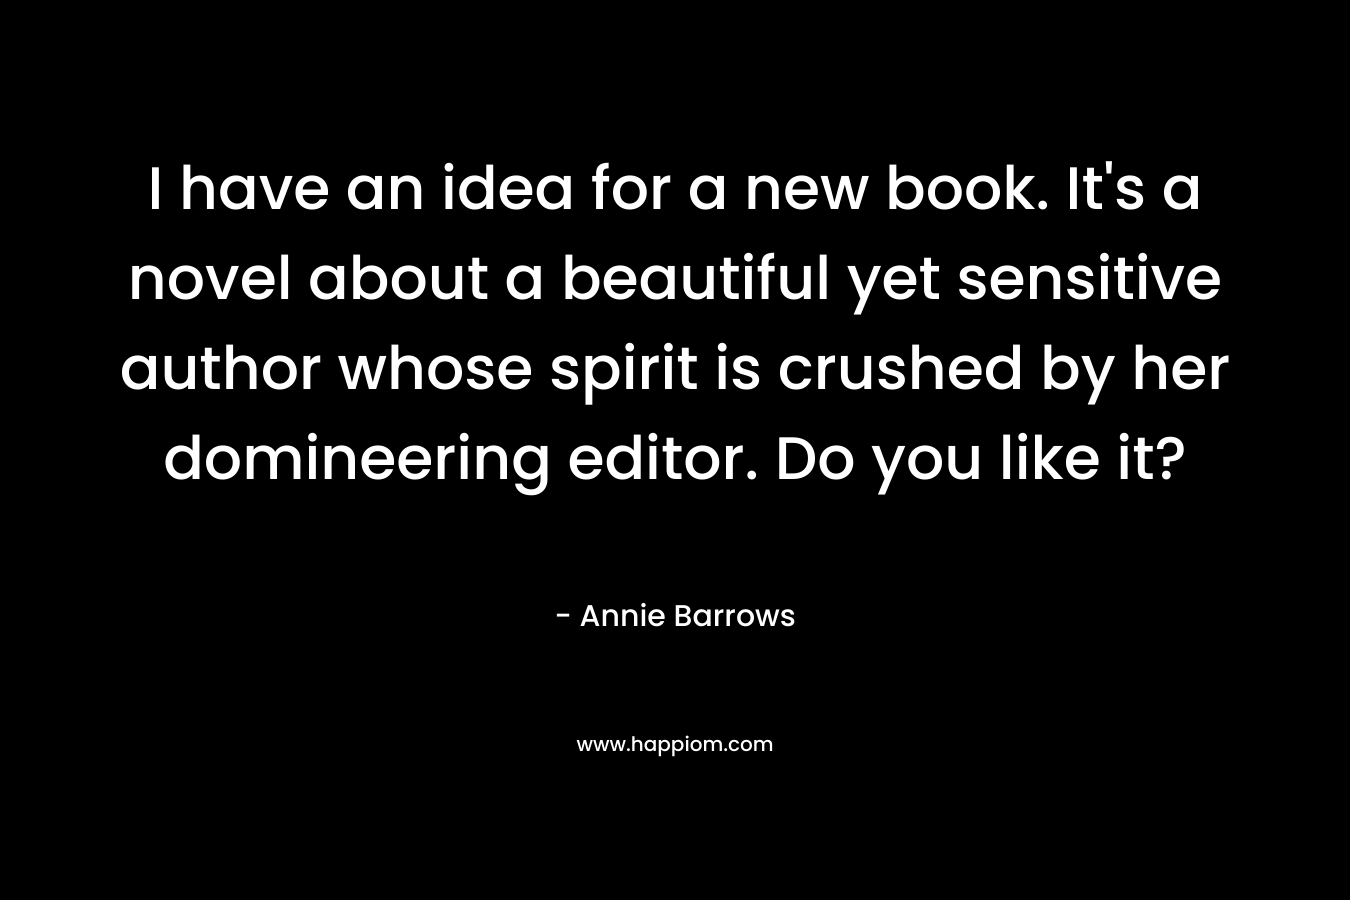 I have an idea for a new book. It’s a novel about a beautiful yet sensitive author whose spirit is crushed by her domineering editor. Do you like it? – Annie Barrows